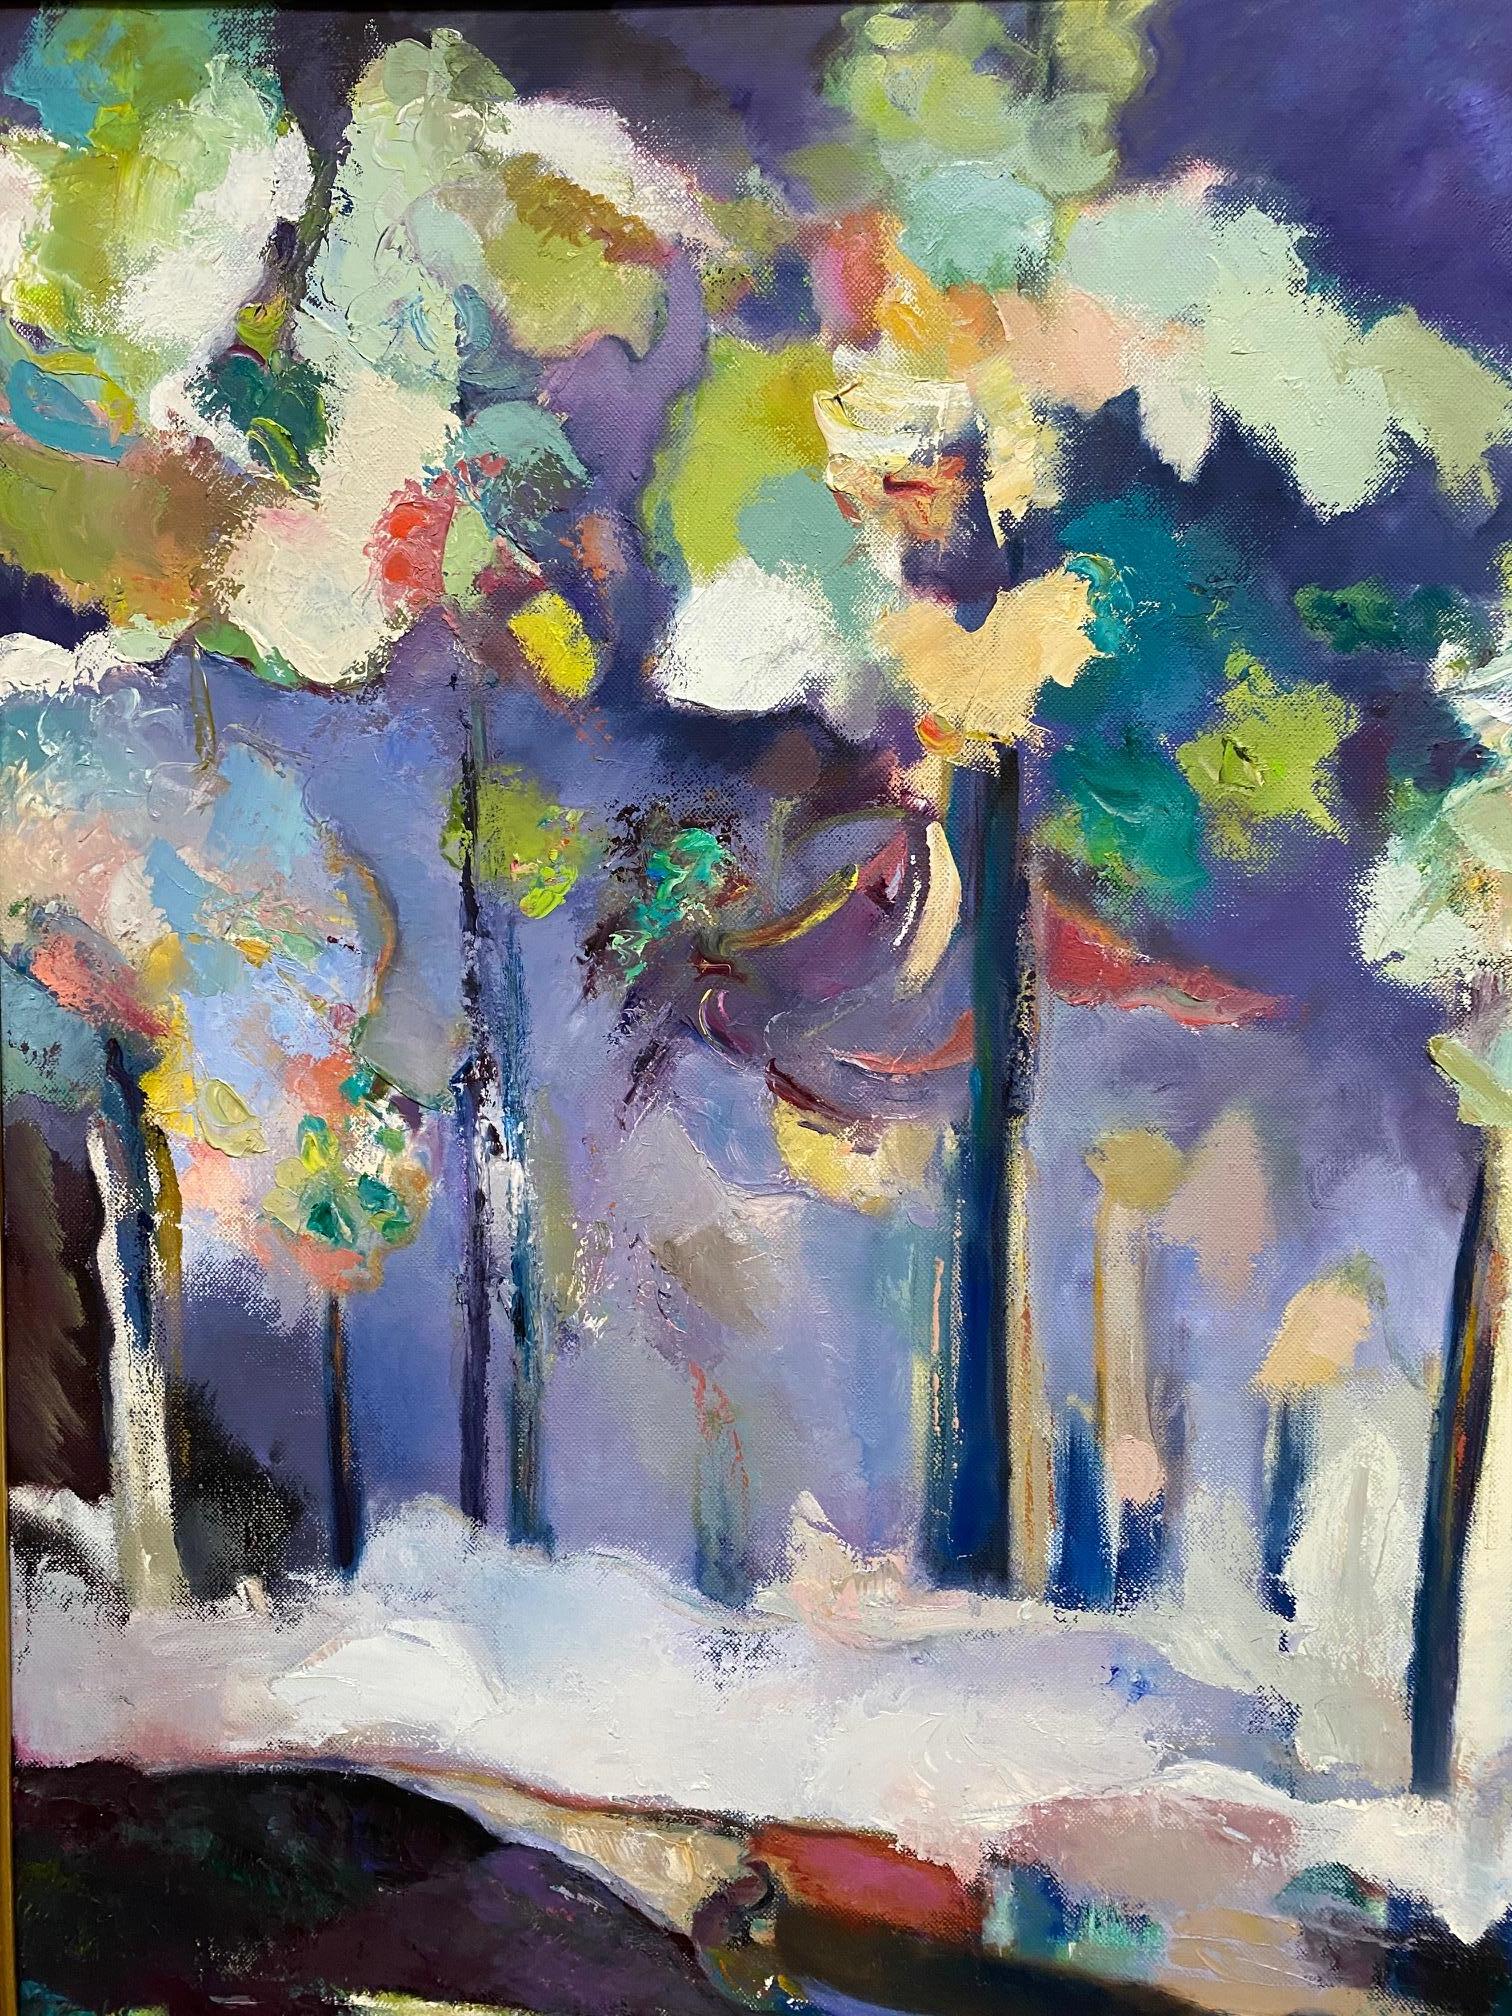 Winter, original  28x22 abstract expressionist landscape - Abstract Expressionist Painting by Carol Carpenter